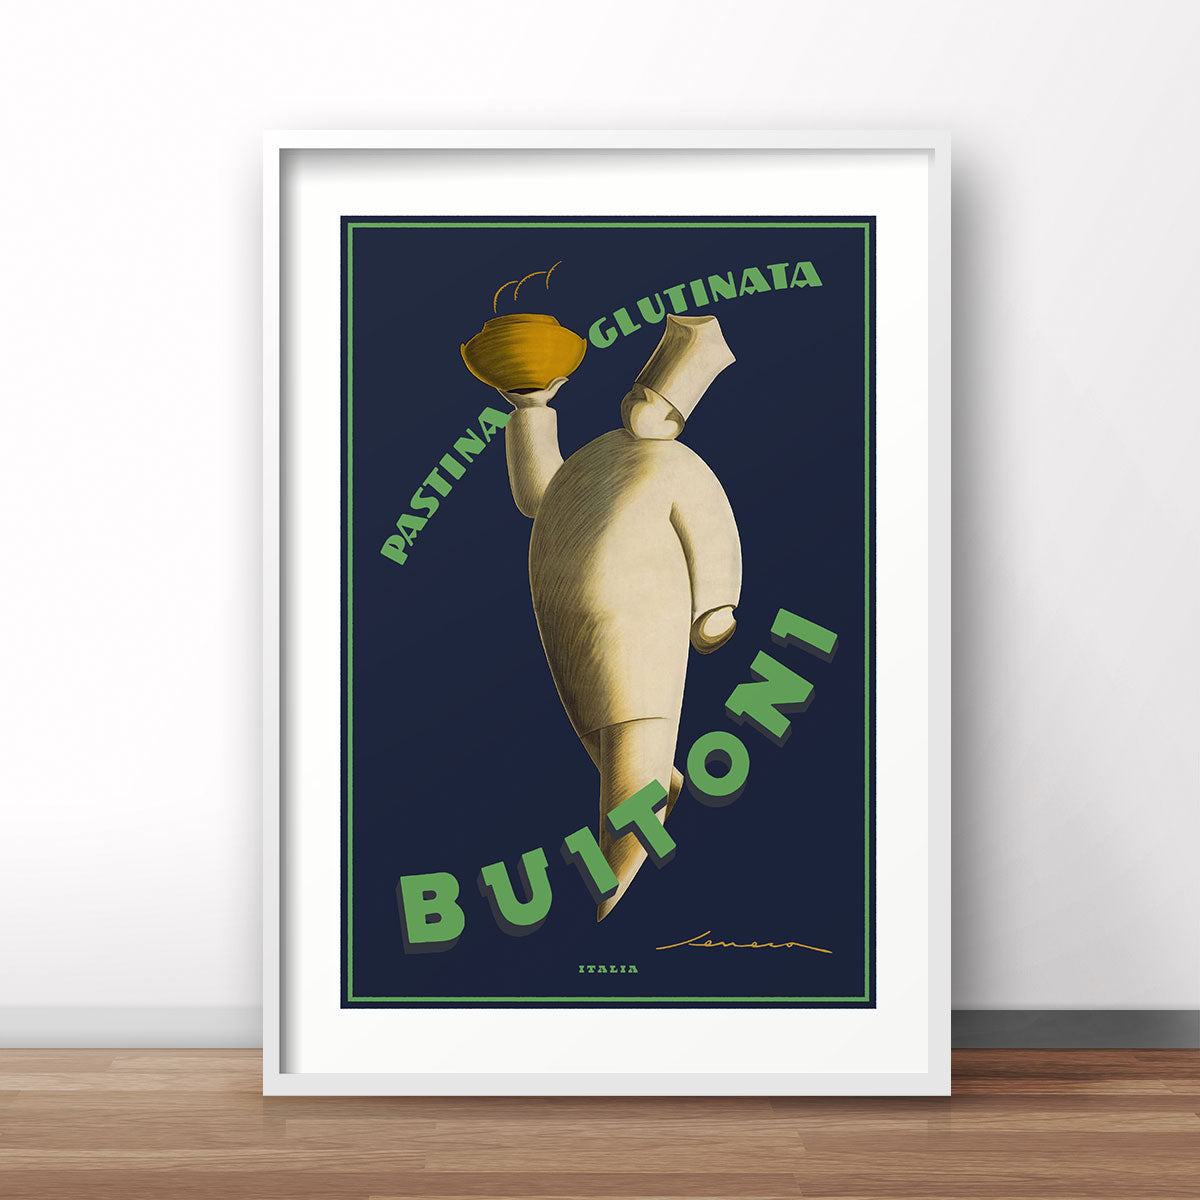 Buitoni Italy retro vintage advertising poster print from Places We Luv